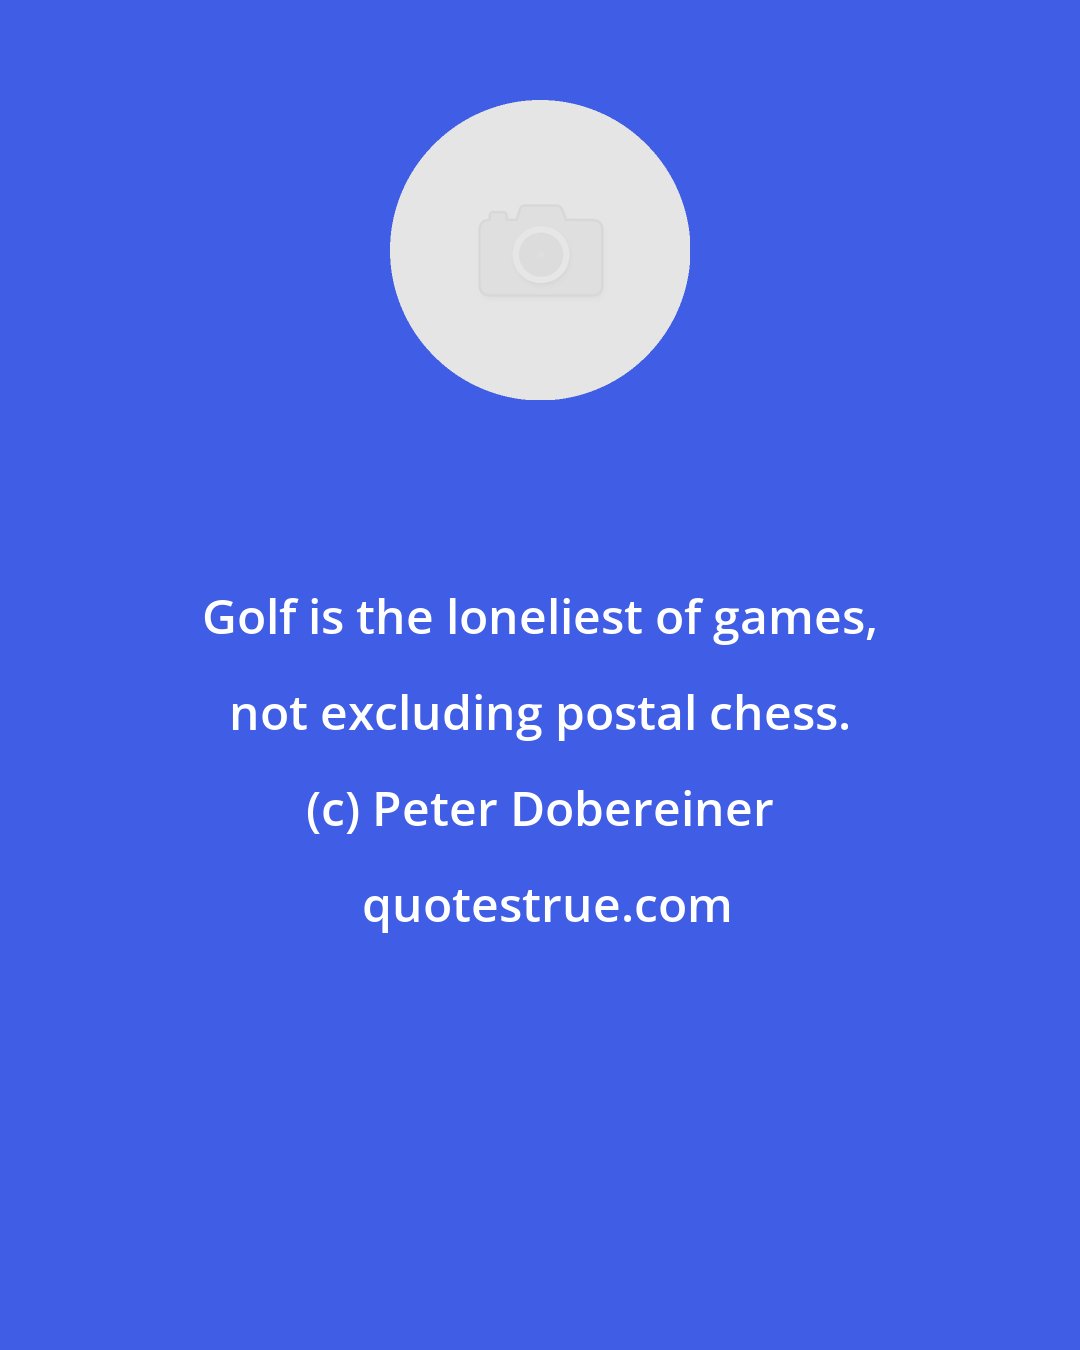 Peter Dobereiner: Golf is the loneliest of games, not excluding postal chess.